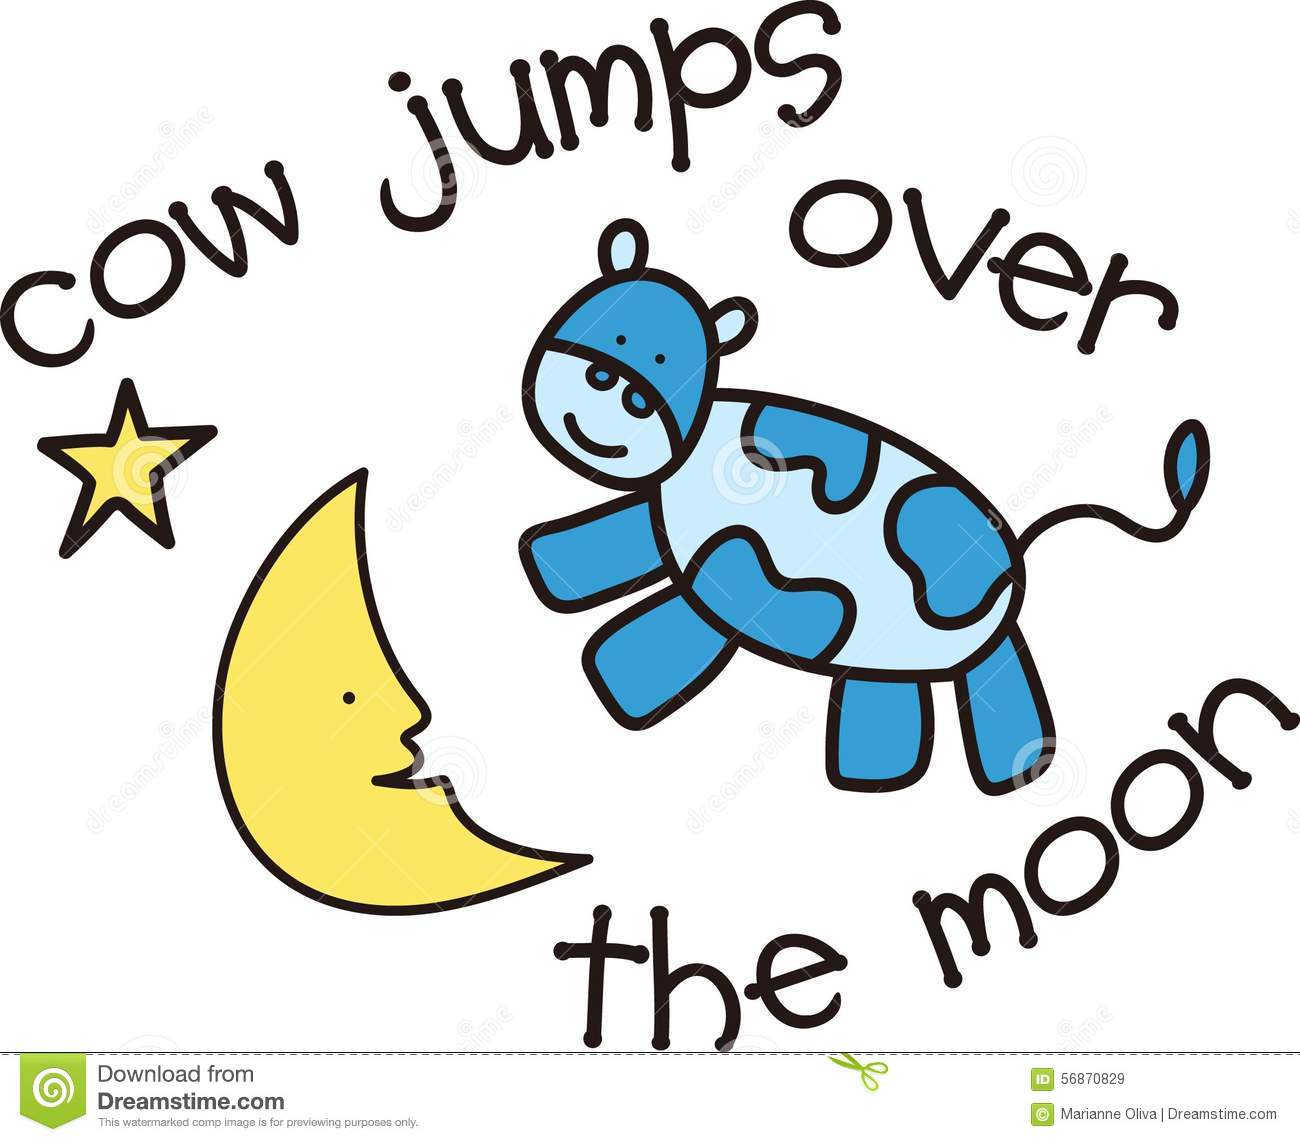 This Cute Design Of The Cow Jumping Over The Moon Makes The Perfect